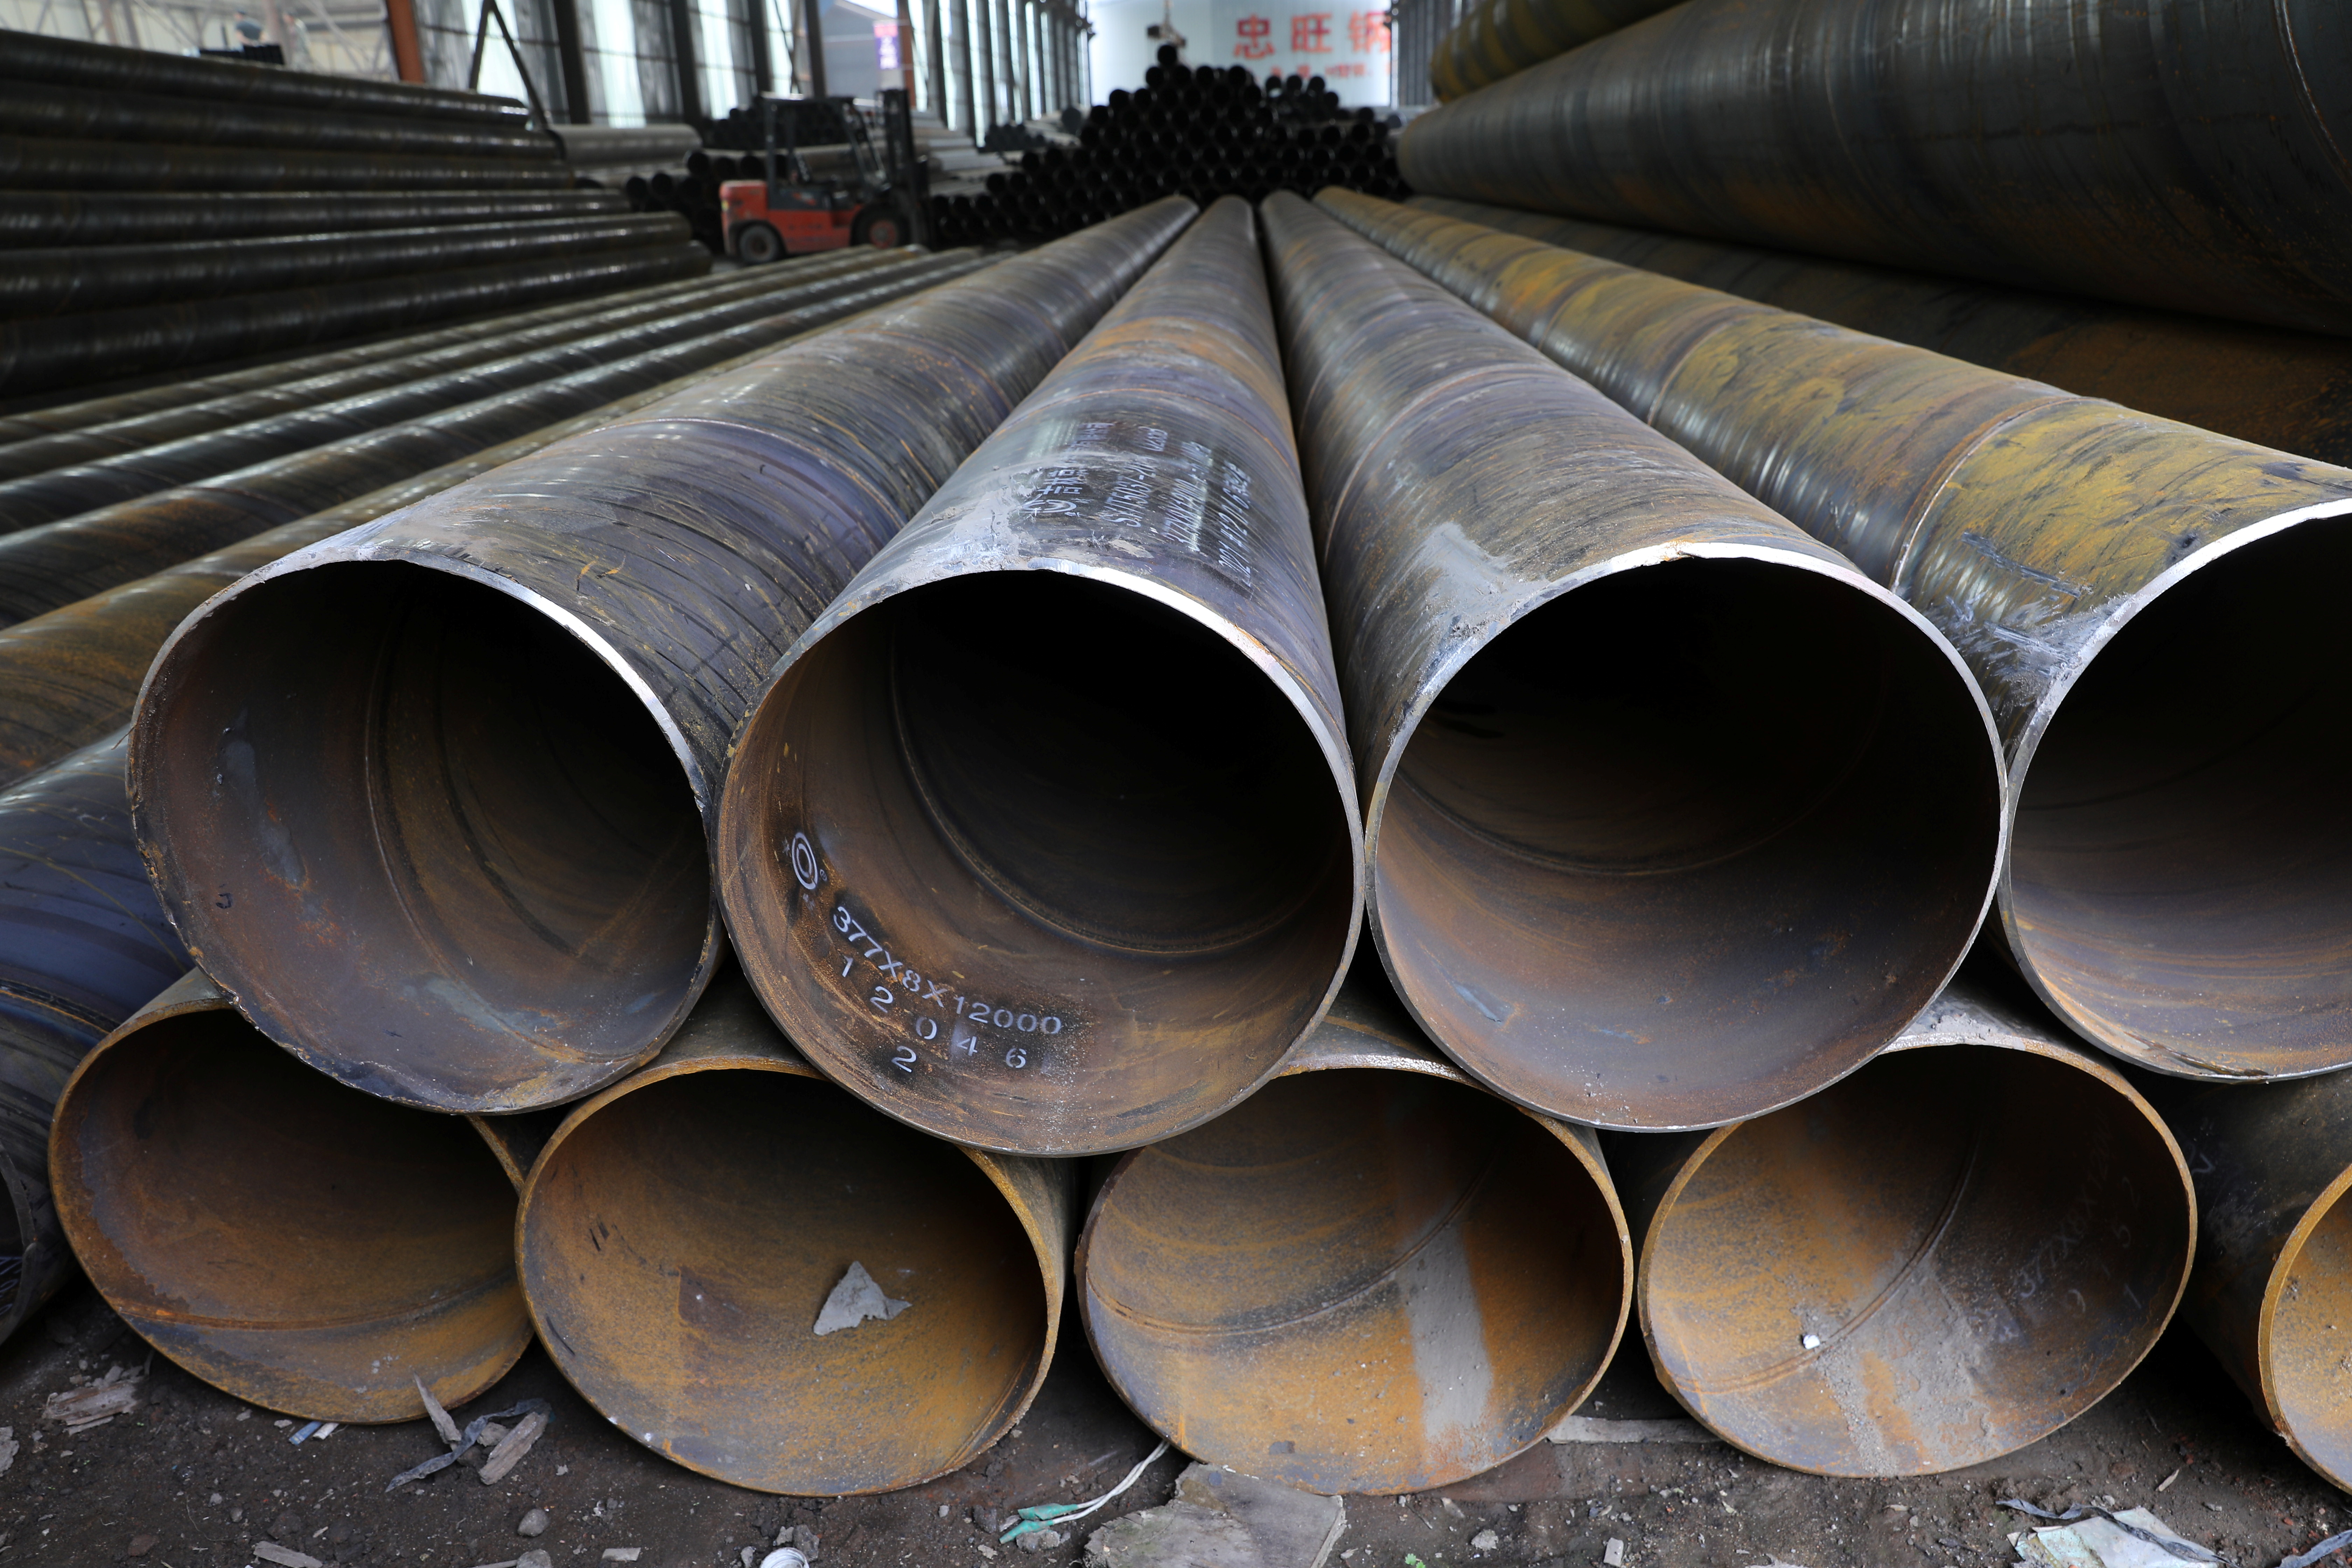 Steel pipes are seen stacked at an industrial park in Shenyang